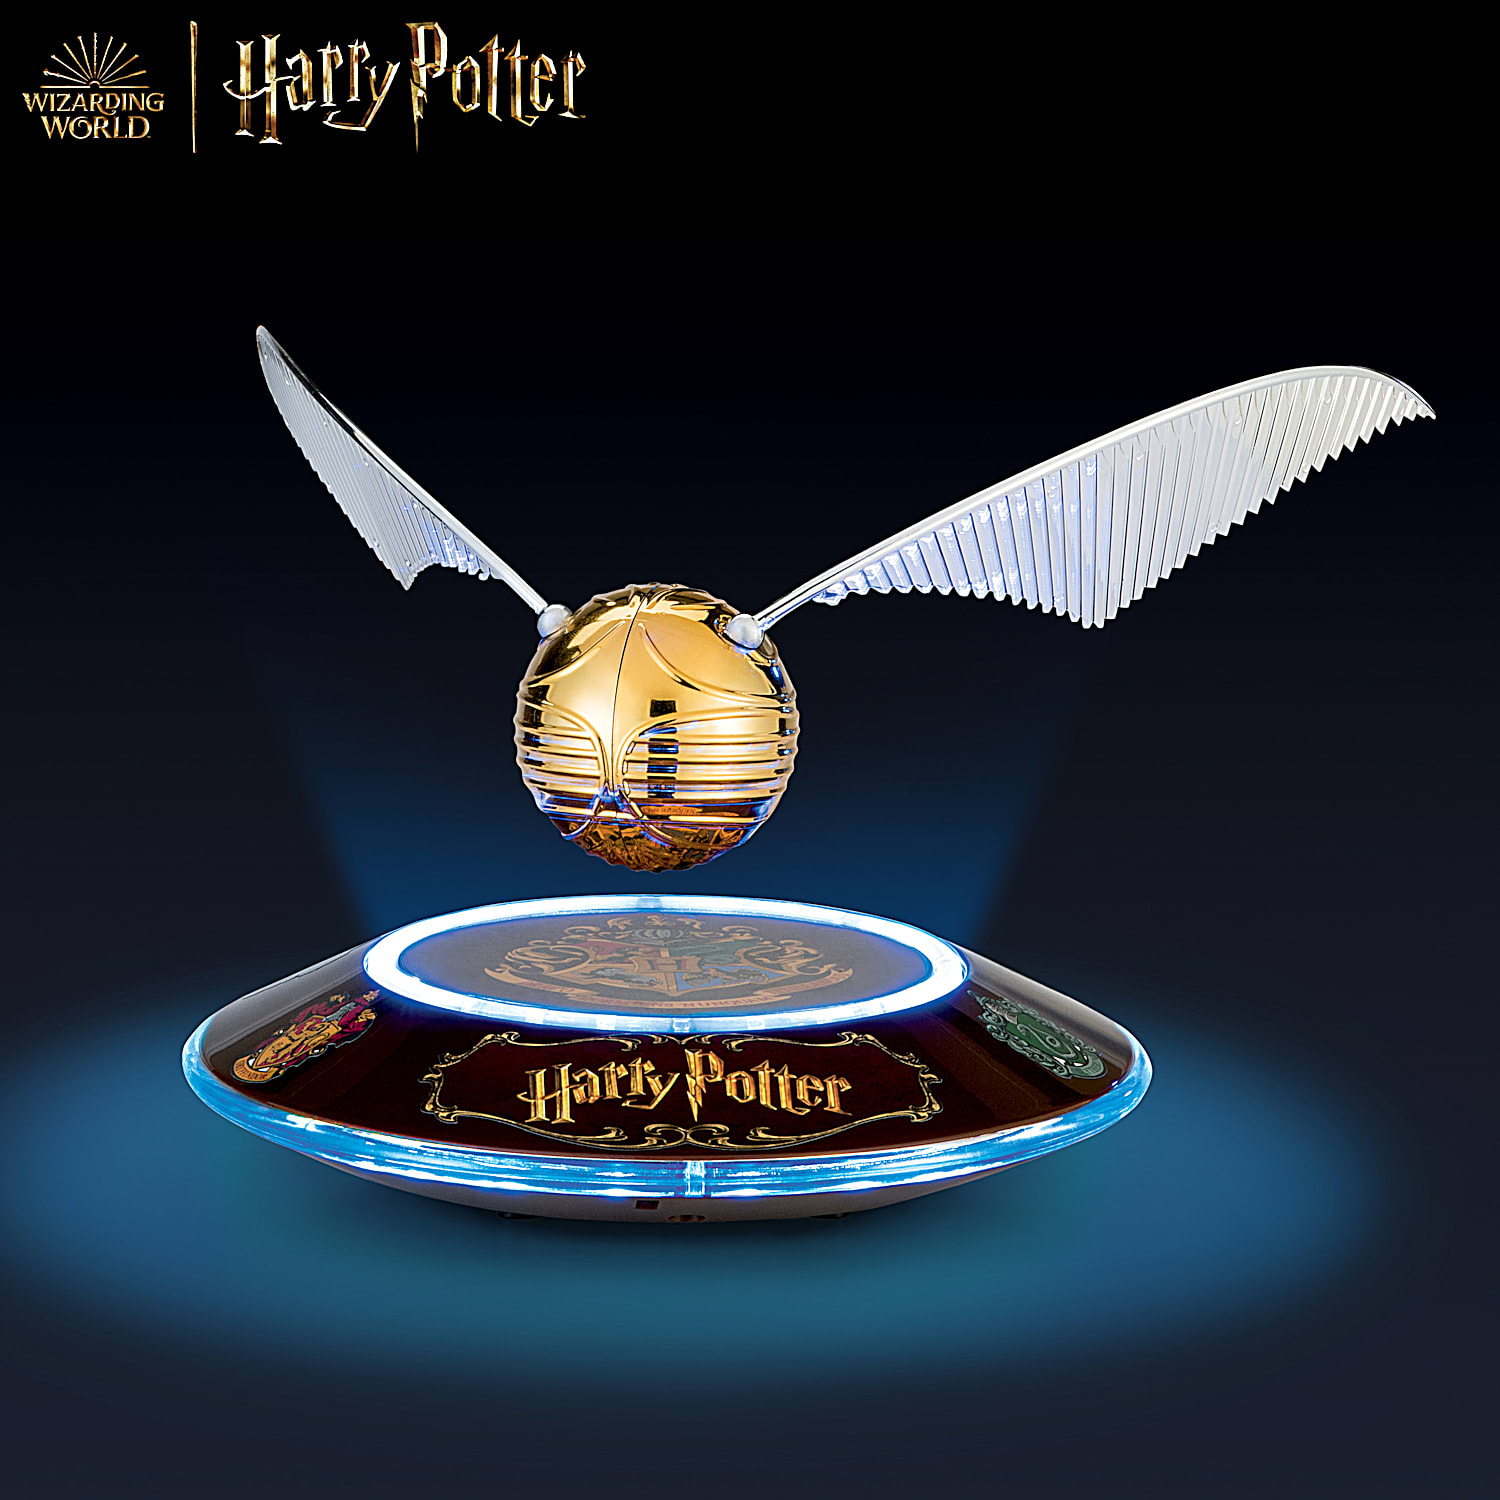 GOLDEN SNITCH REVIEW - THE BRADFORD EXCHANGE - HARRY POTTER 